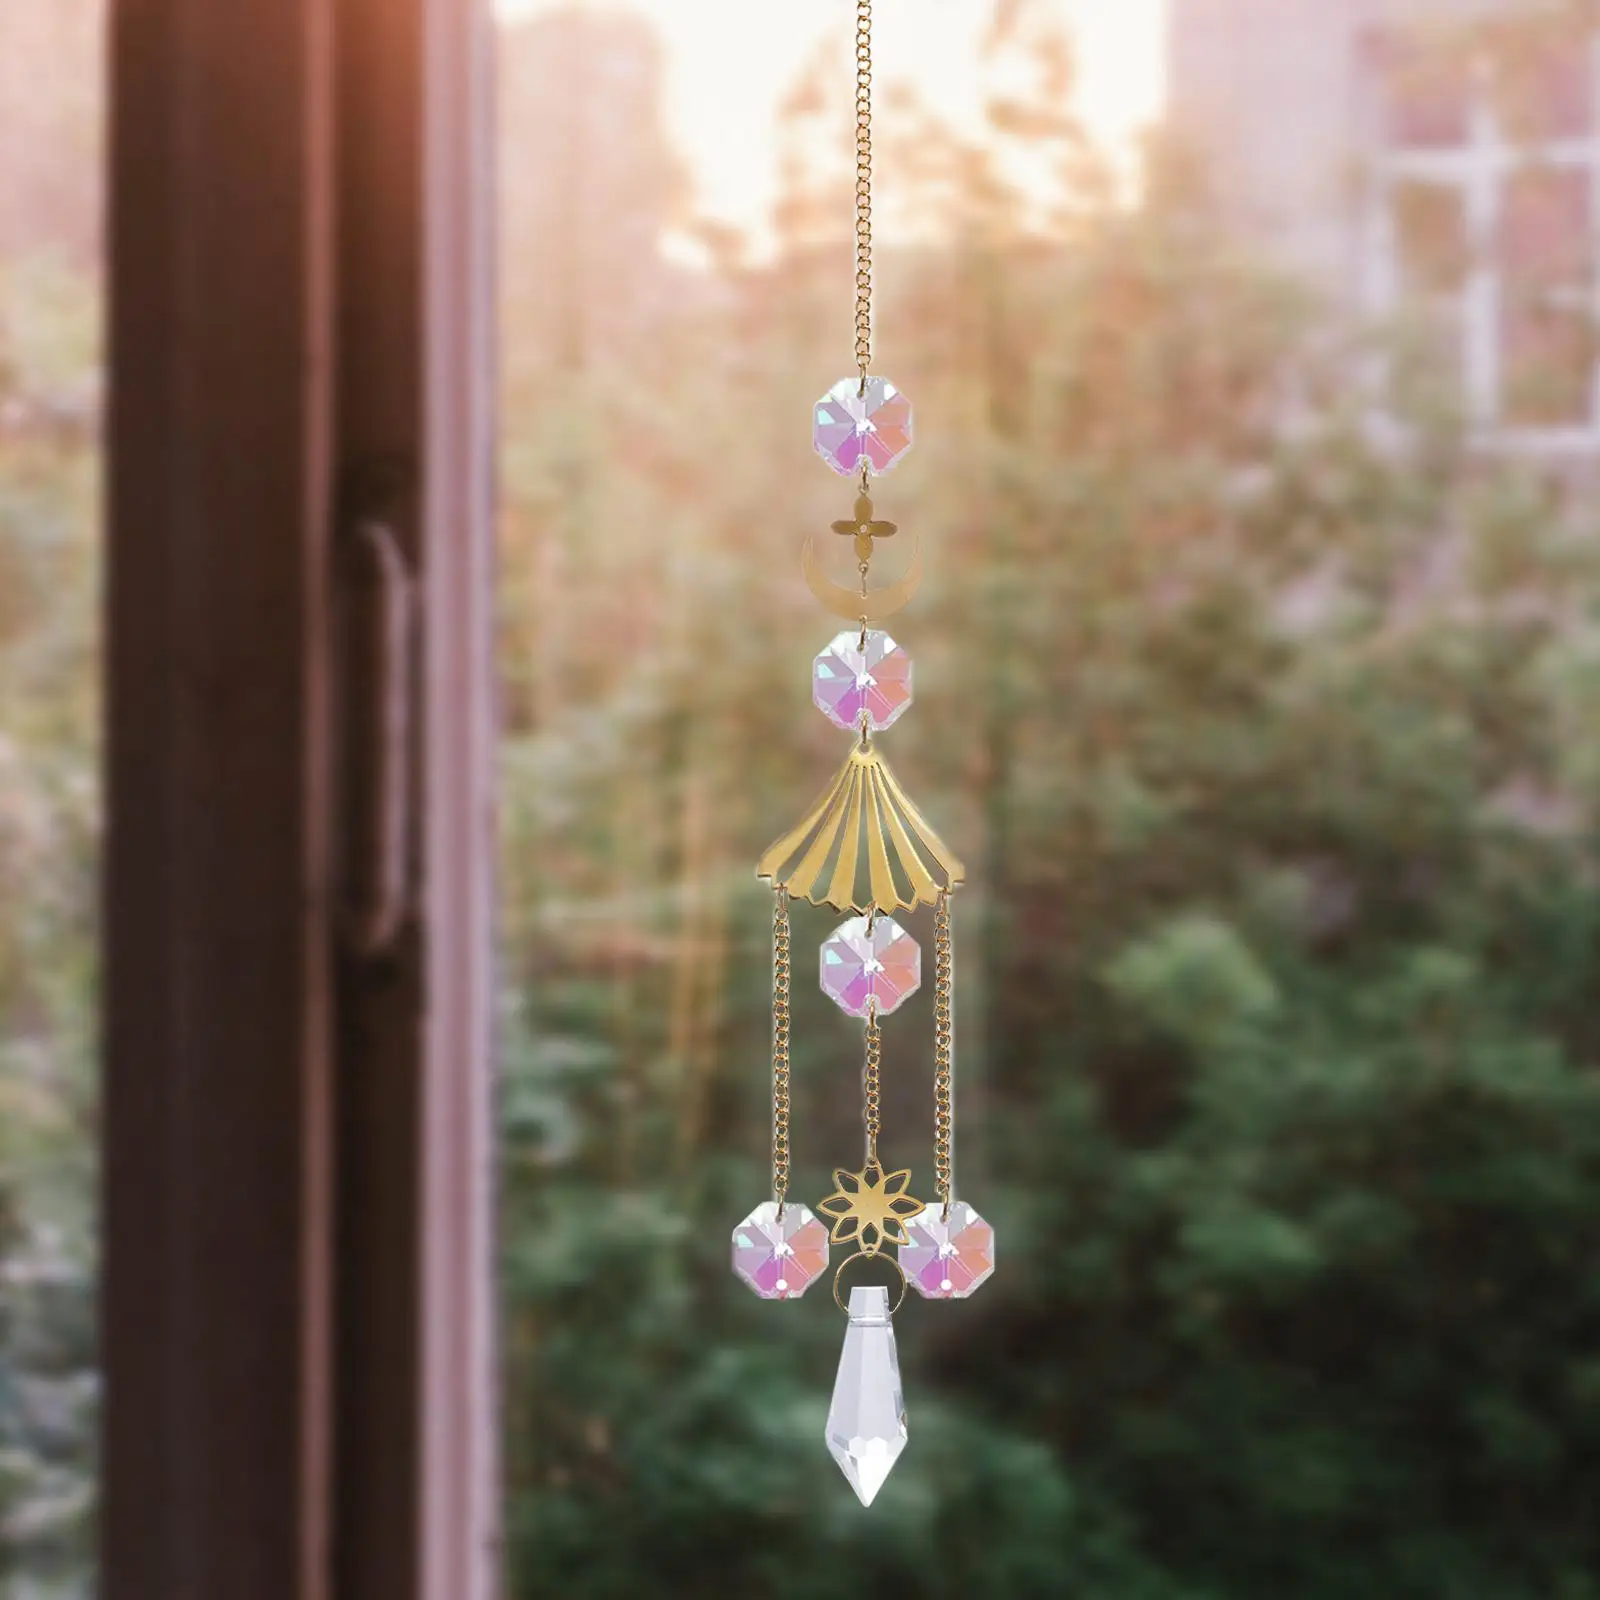 Hanging  Decor Ornaments Gifts Gold Decoration Crystal Pendant Rainbow  for Garden Windows Outside Office Yard